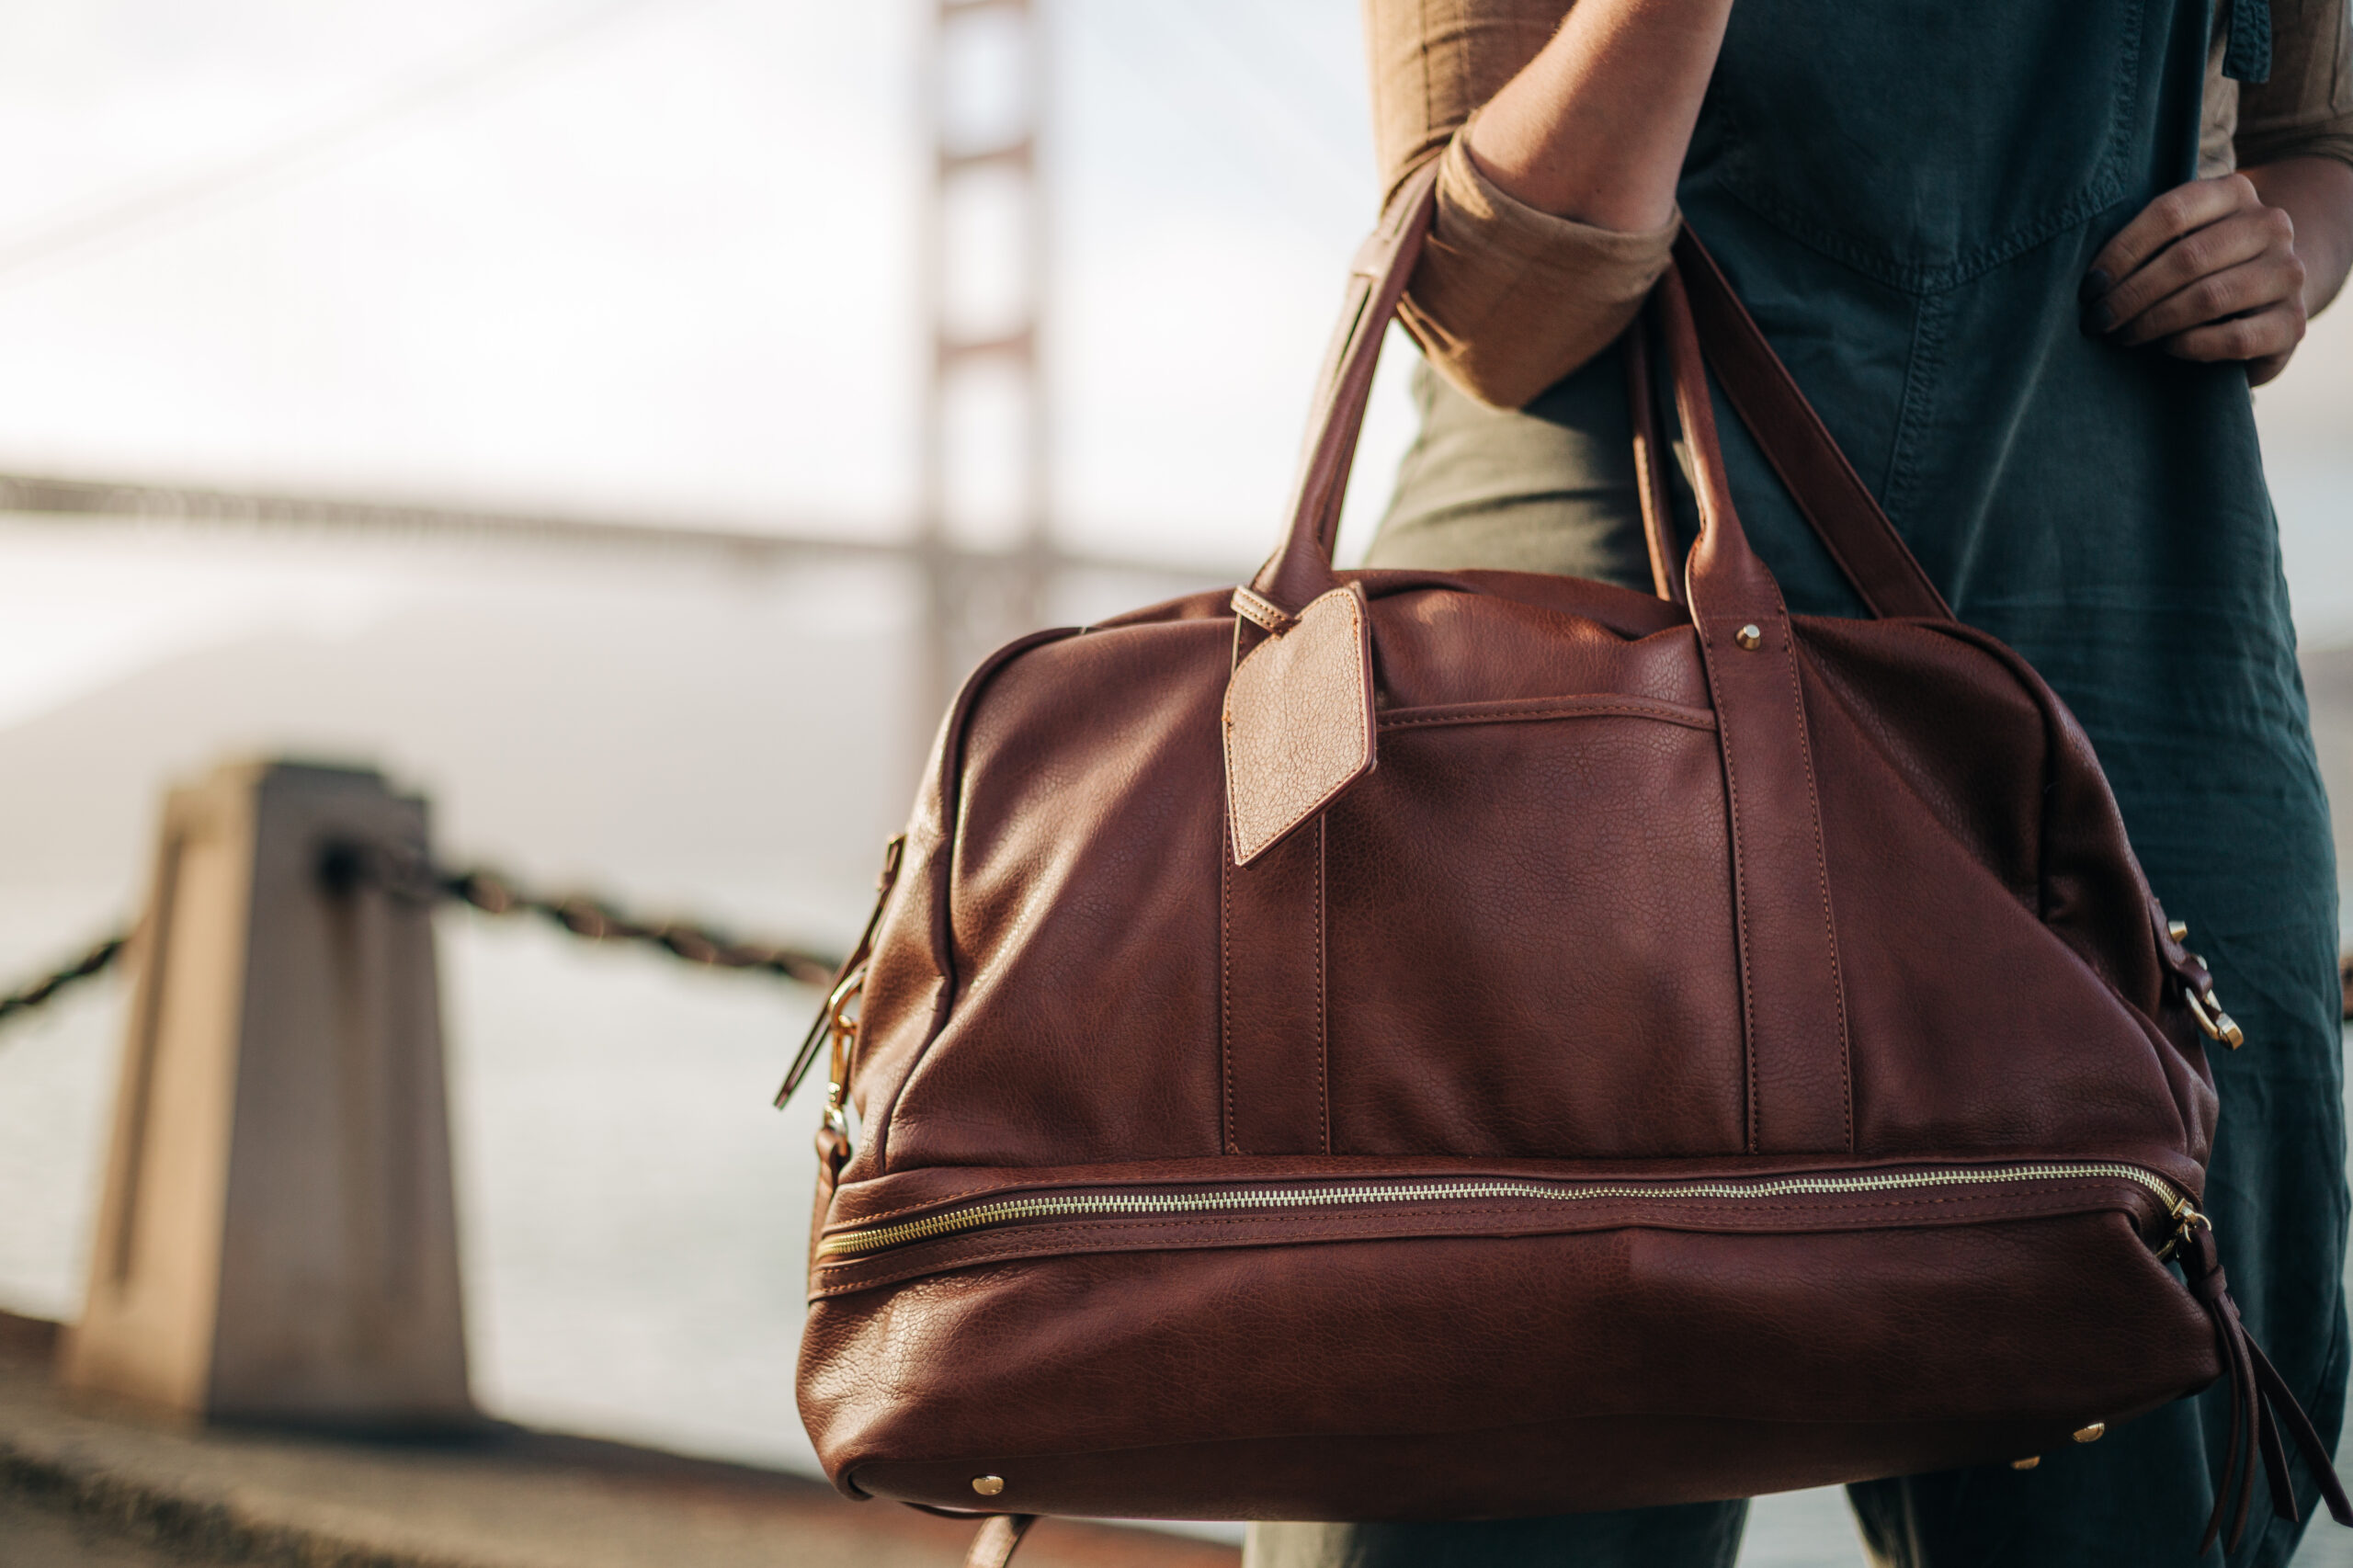 KatWalkSF at the golden gate bridge with the The Perfect Weekender from Sole Society.